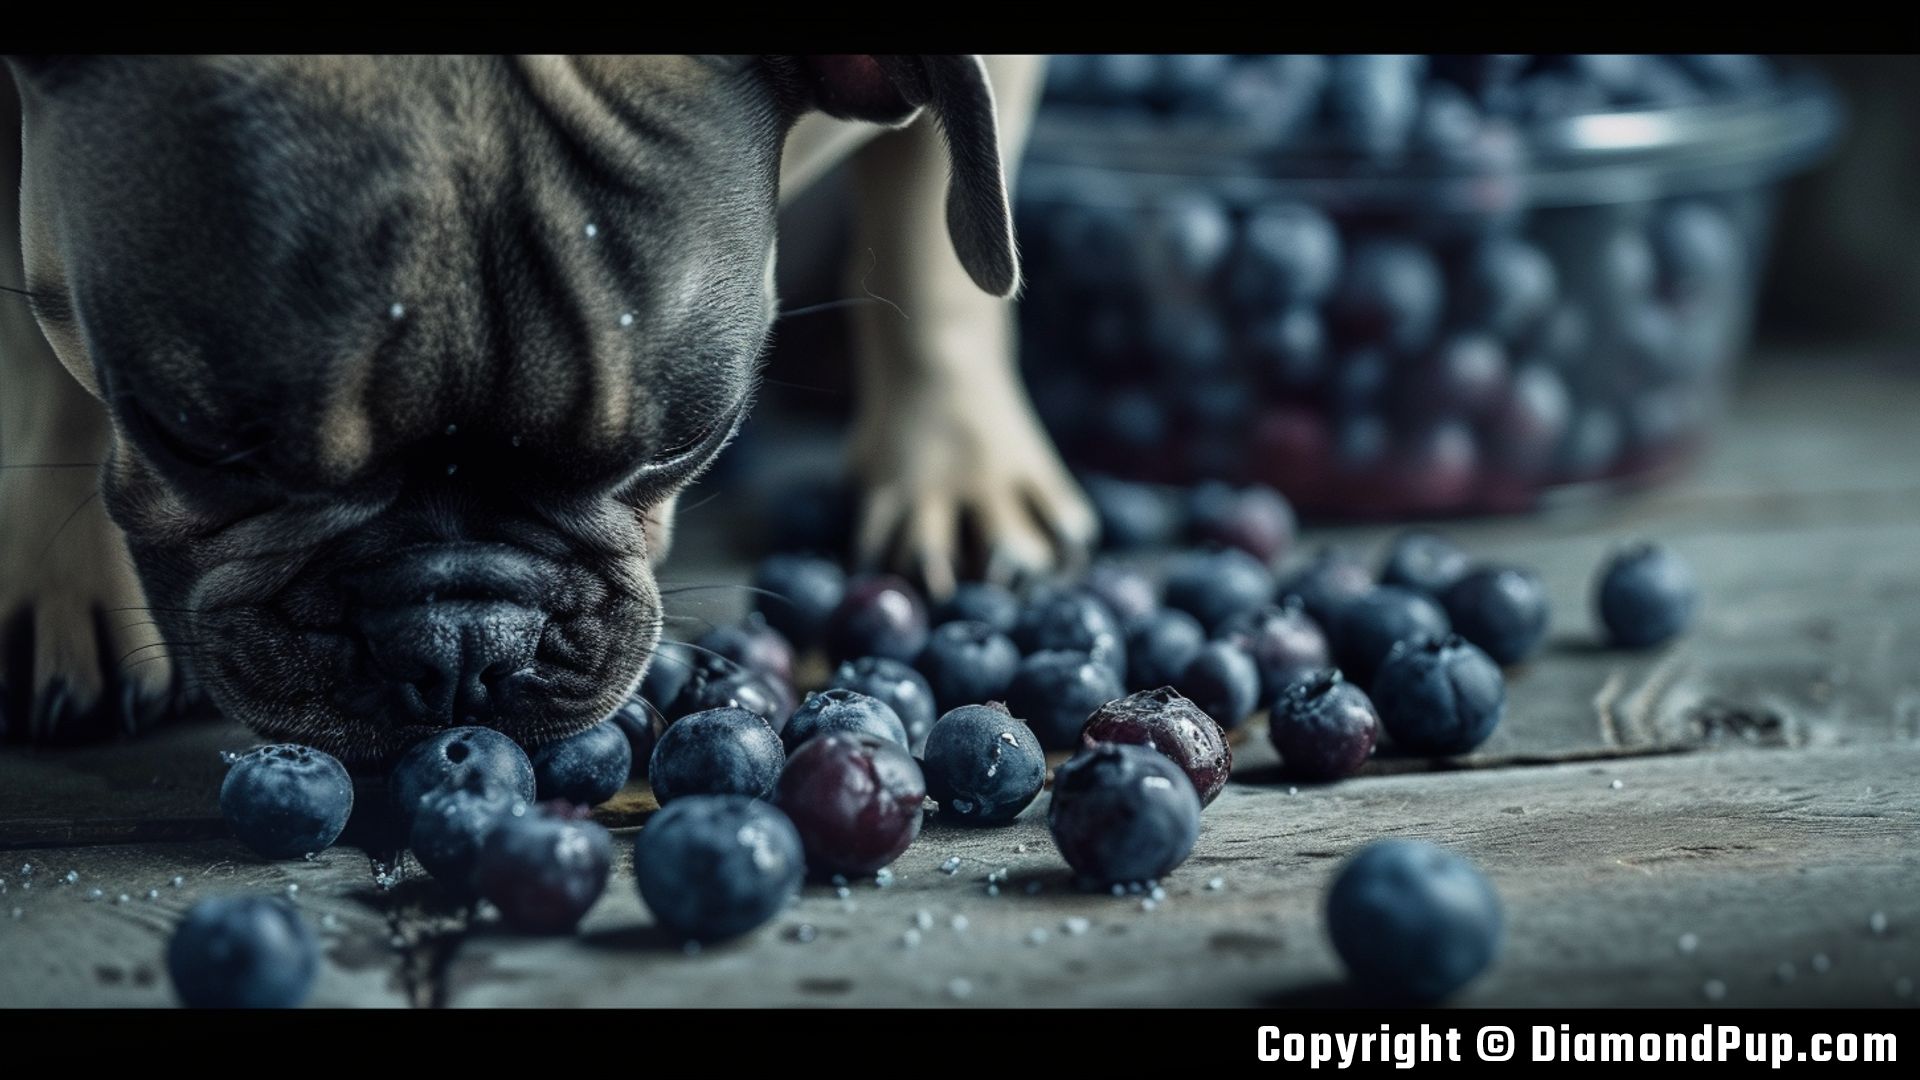 Photograph of an Adorable French Bulldog Snacking on Blueberries